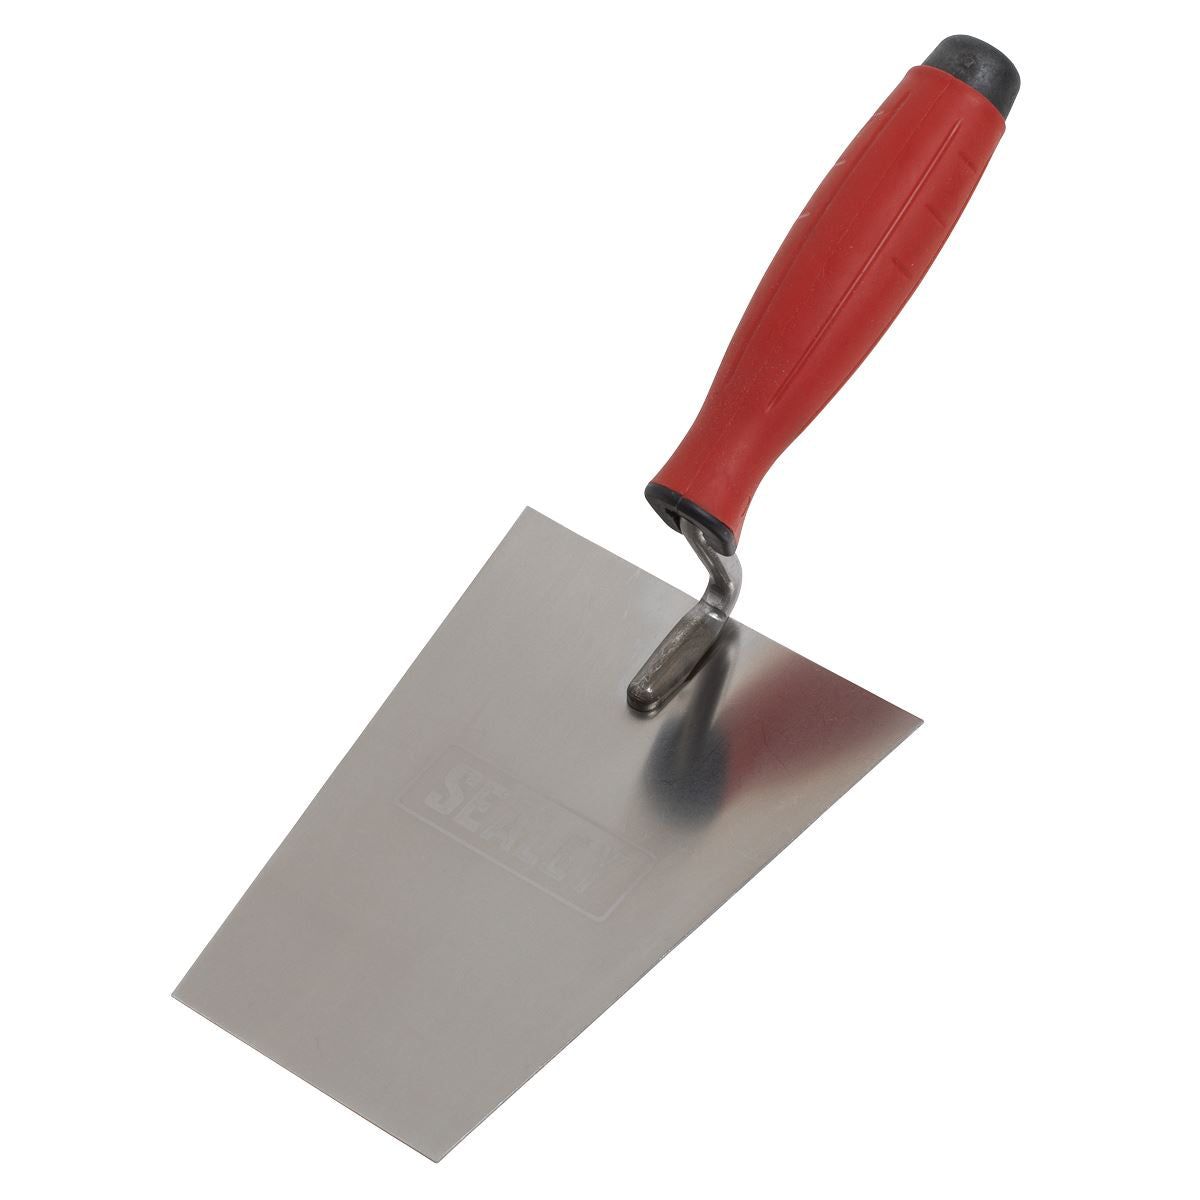 Sealey Stainless Steel Masonry Trowel - Rubber Handle - 160mm